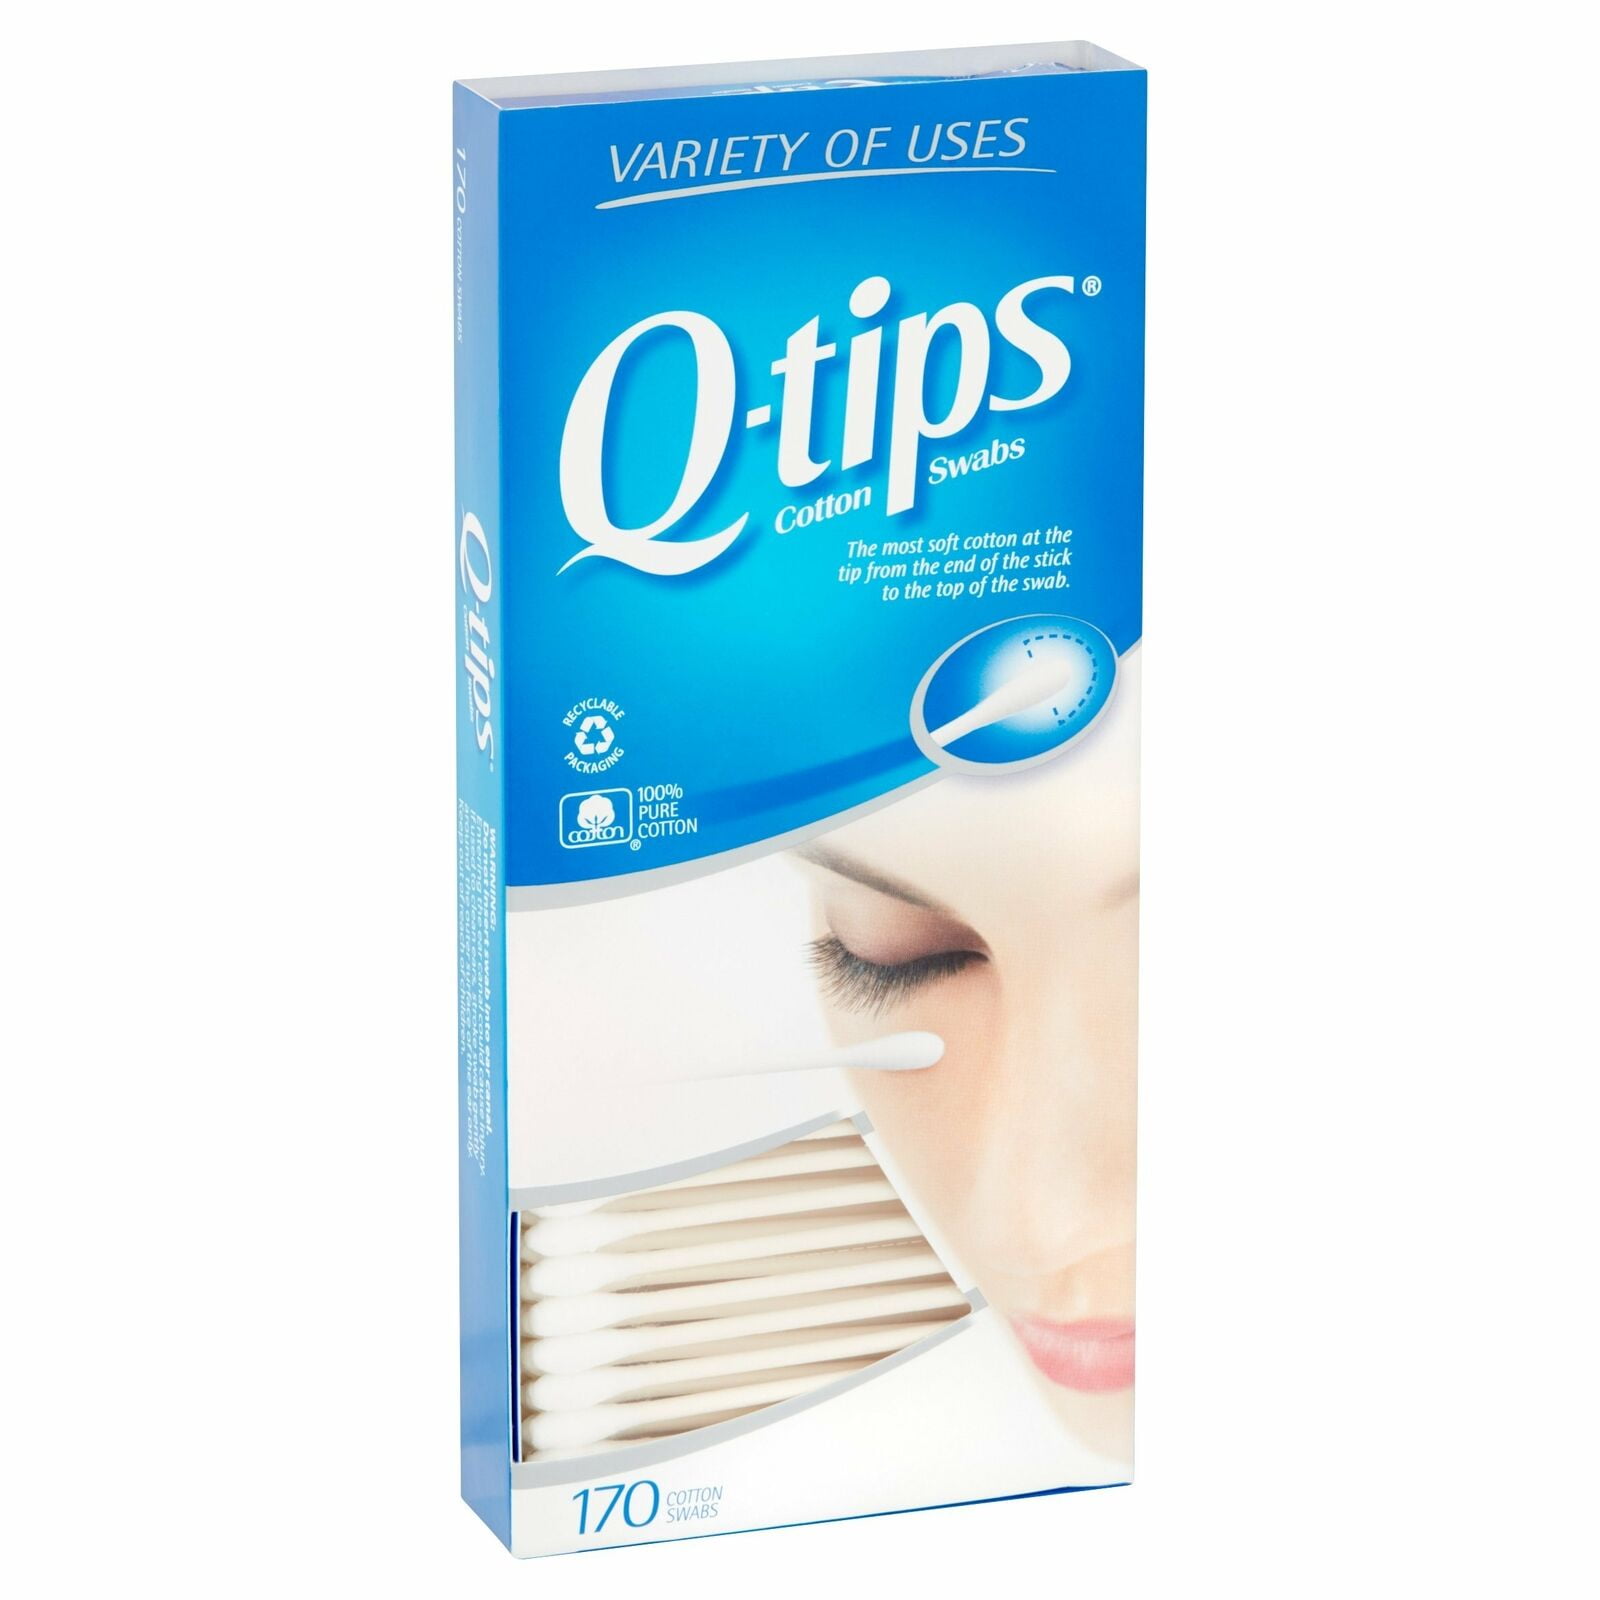  Q-tips Cotton Swabs - Travel Q-tips for Beauty, Makeup, Nails,  Men's Grooming, and More, Perfect for On the Go, Travel Size Case, 30 Count  Ea (Pack of 2) : Beauty